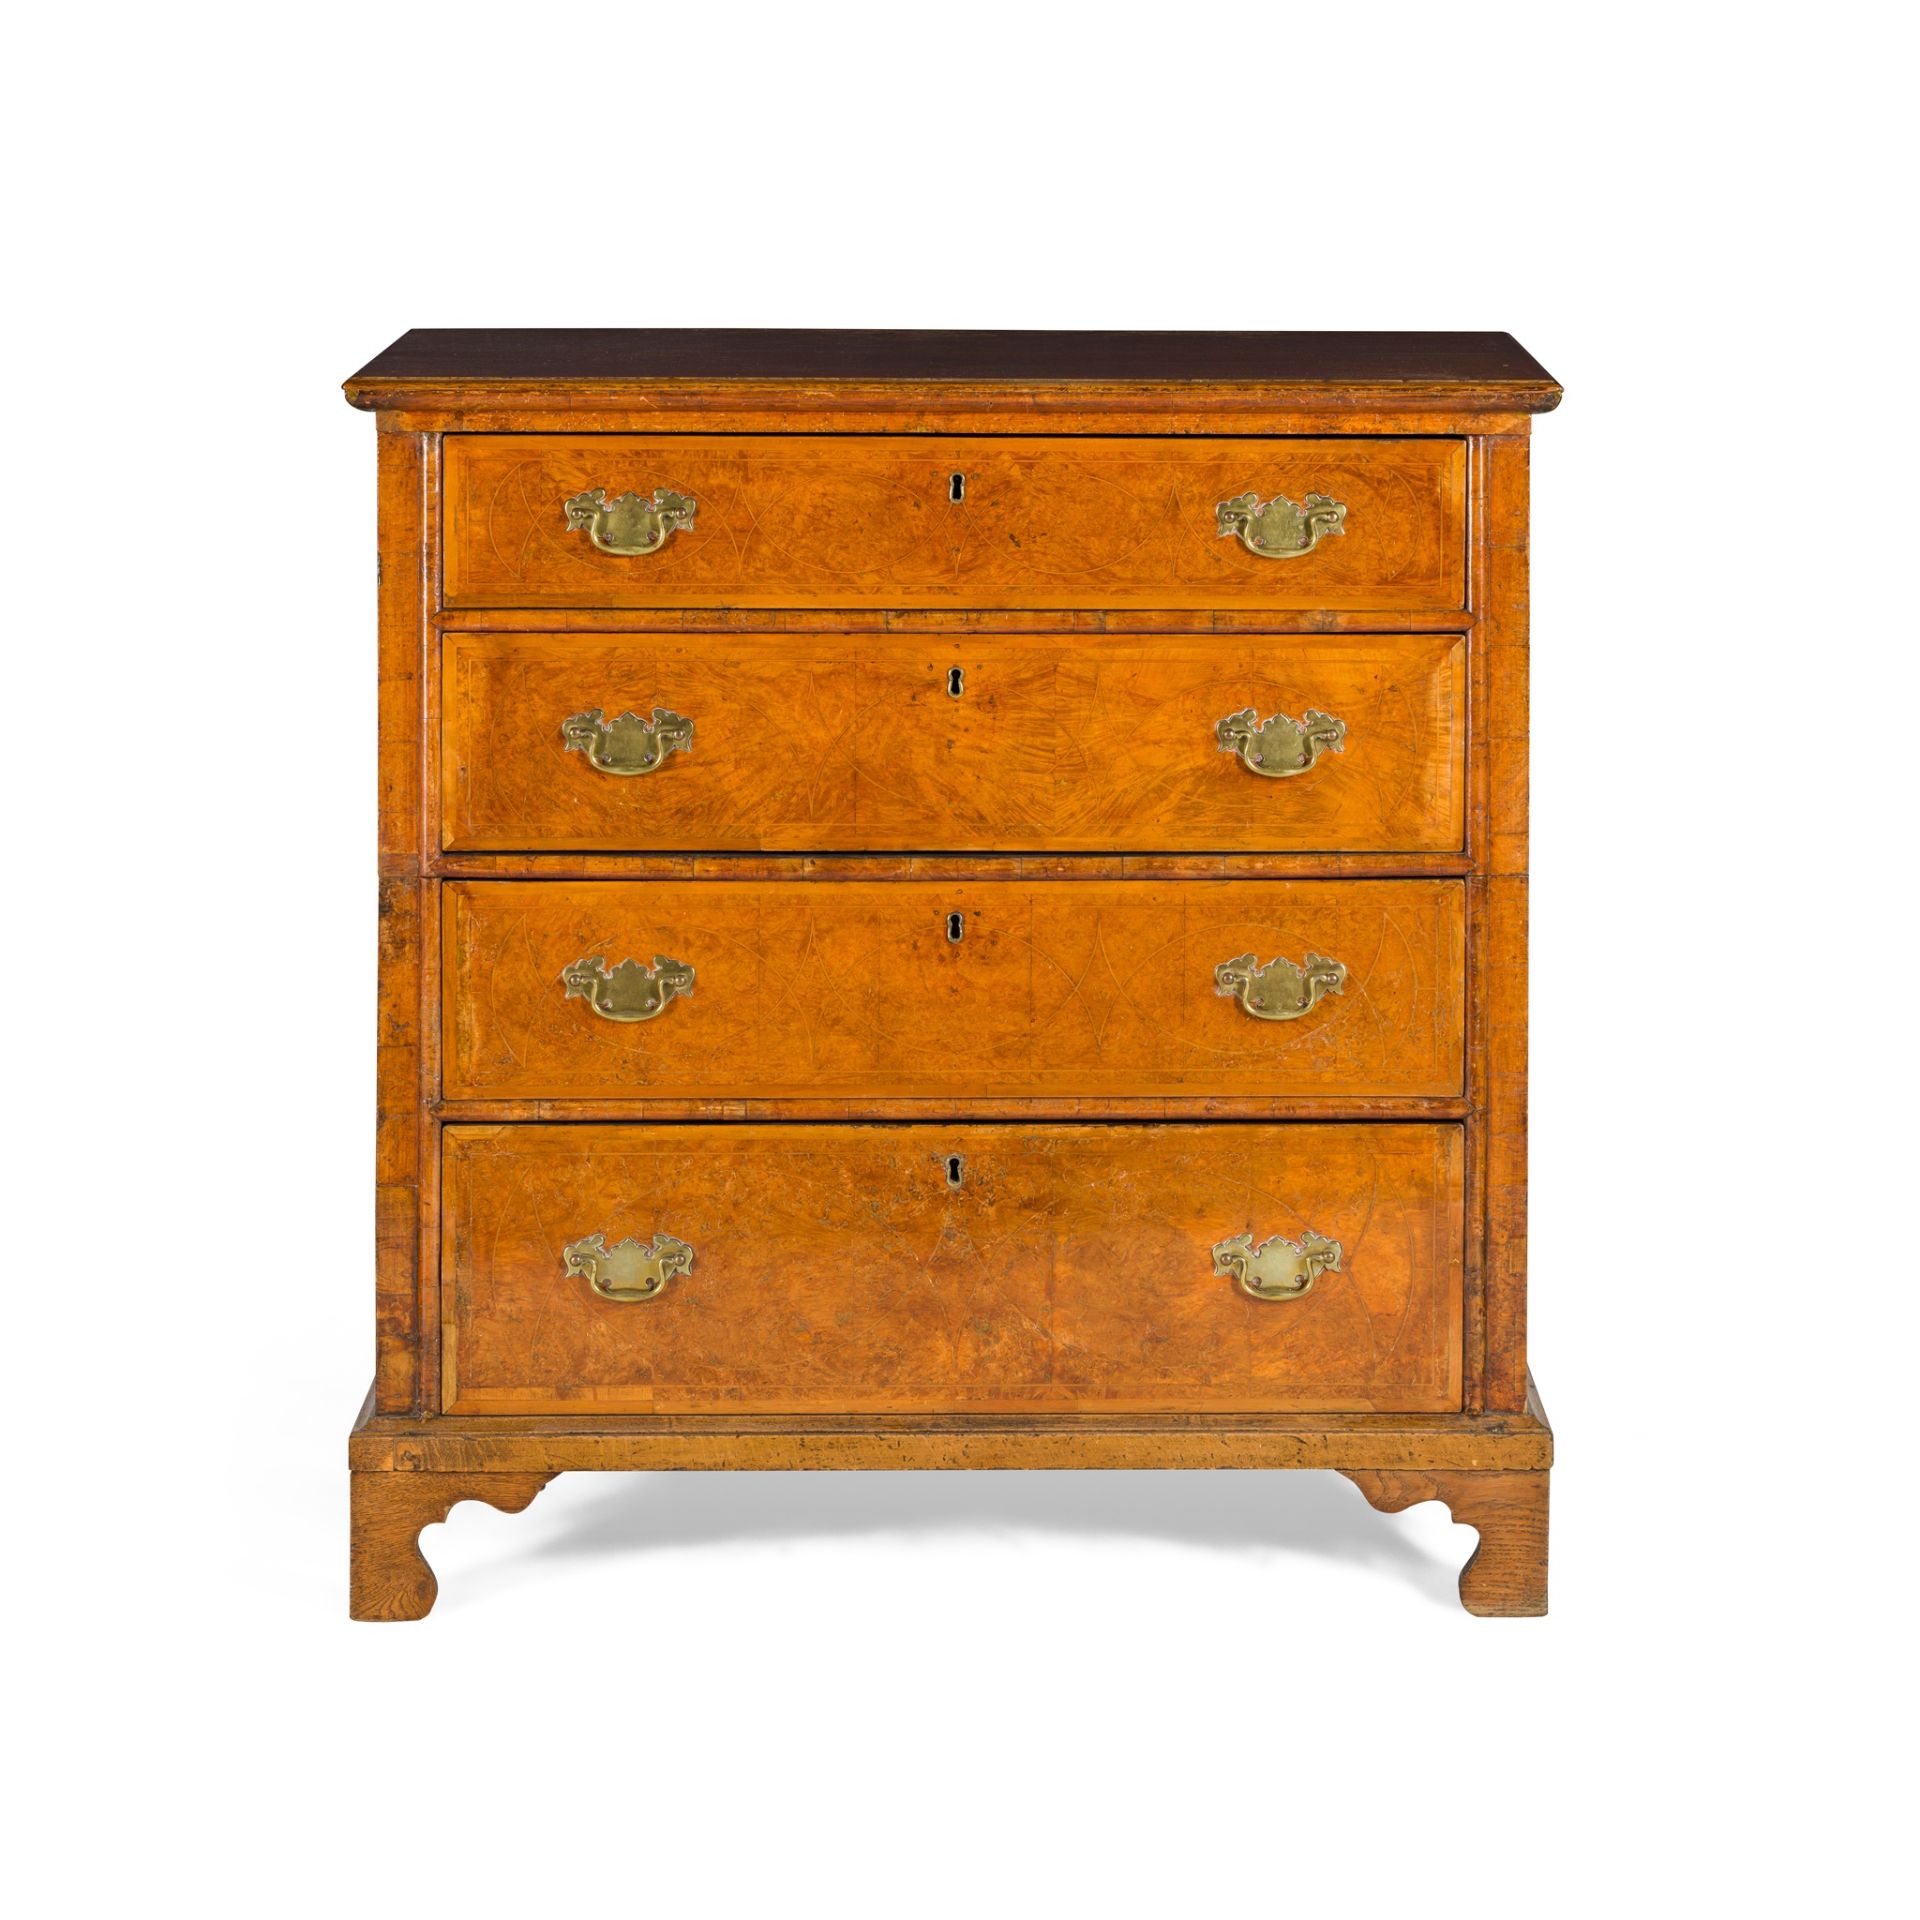 GEORGE I WALNUT, INLAY, AND OAK CHEST OF DRAWERS 18TH CENTURY